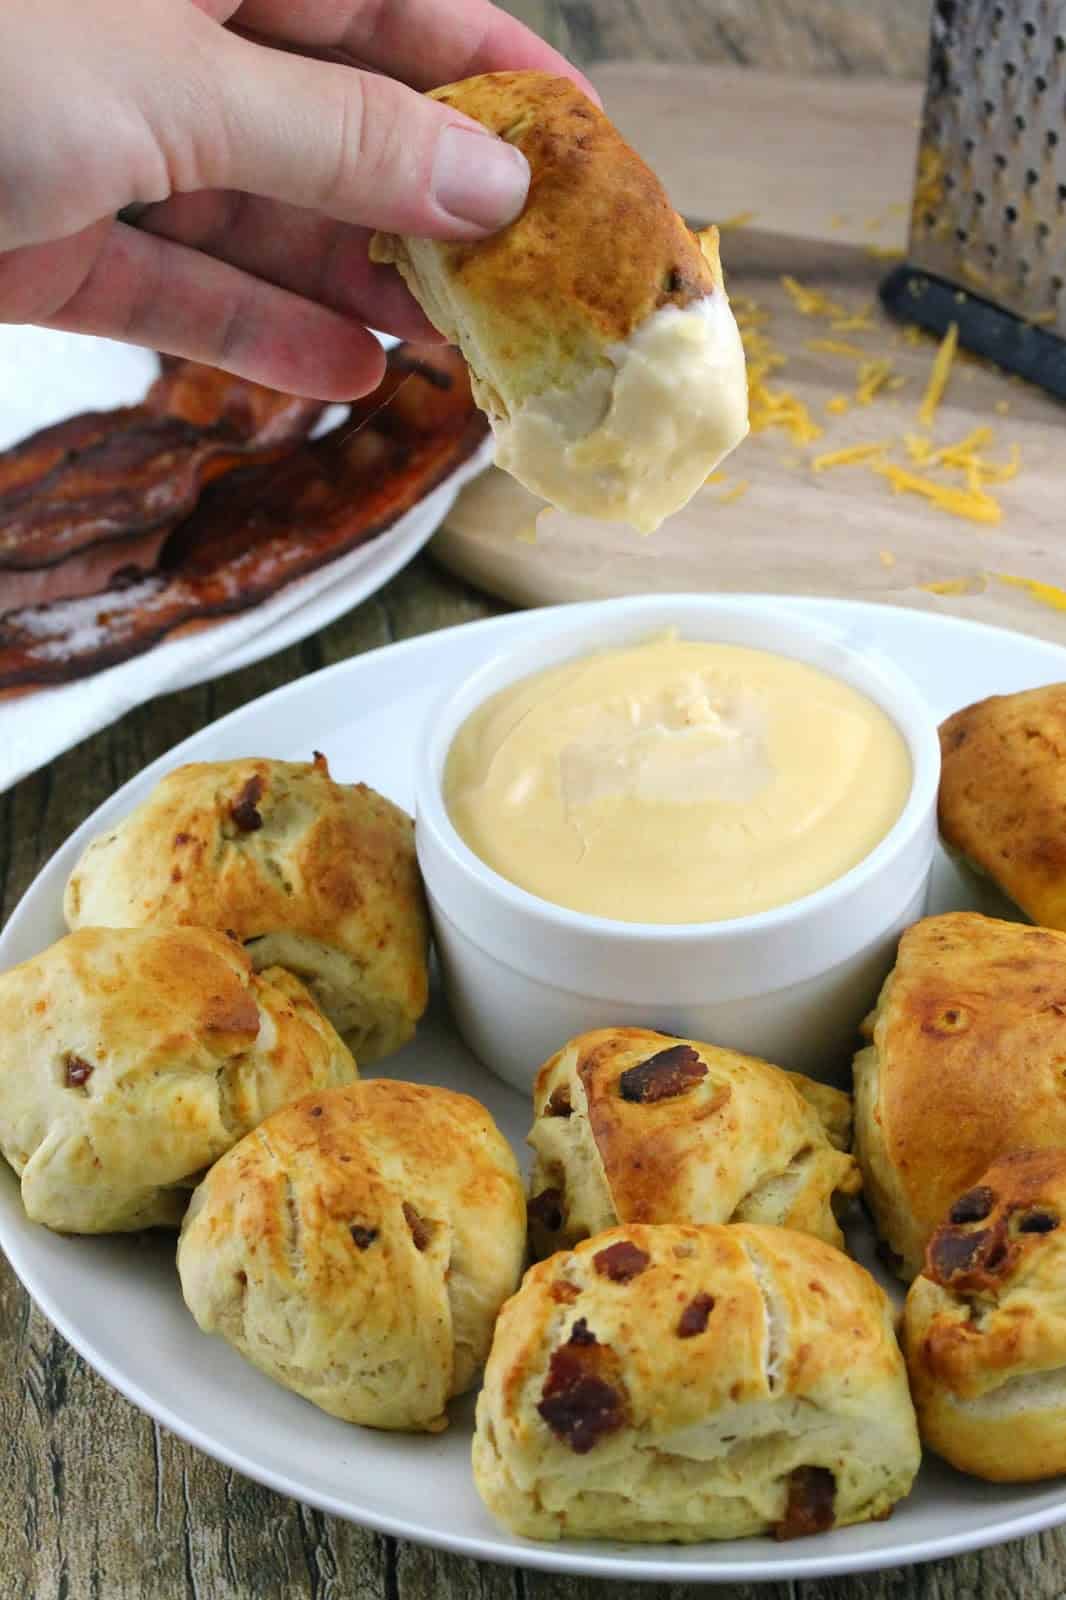 Bacon cheddar pretzel bites on a white plate with a dipping sauce. One bacon cheddar pretzel bite is being pulled out of the dip.